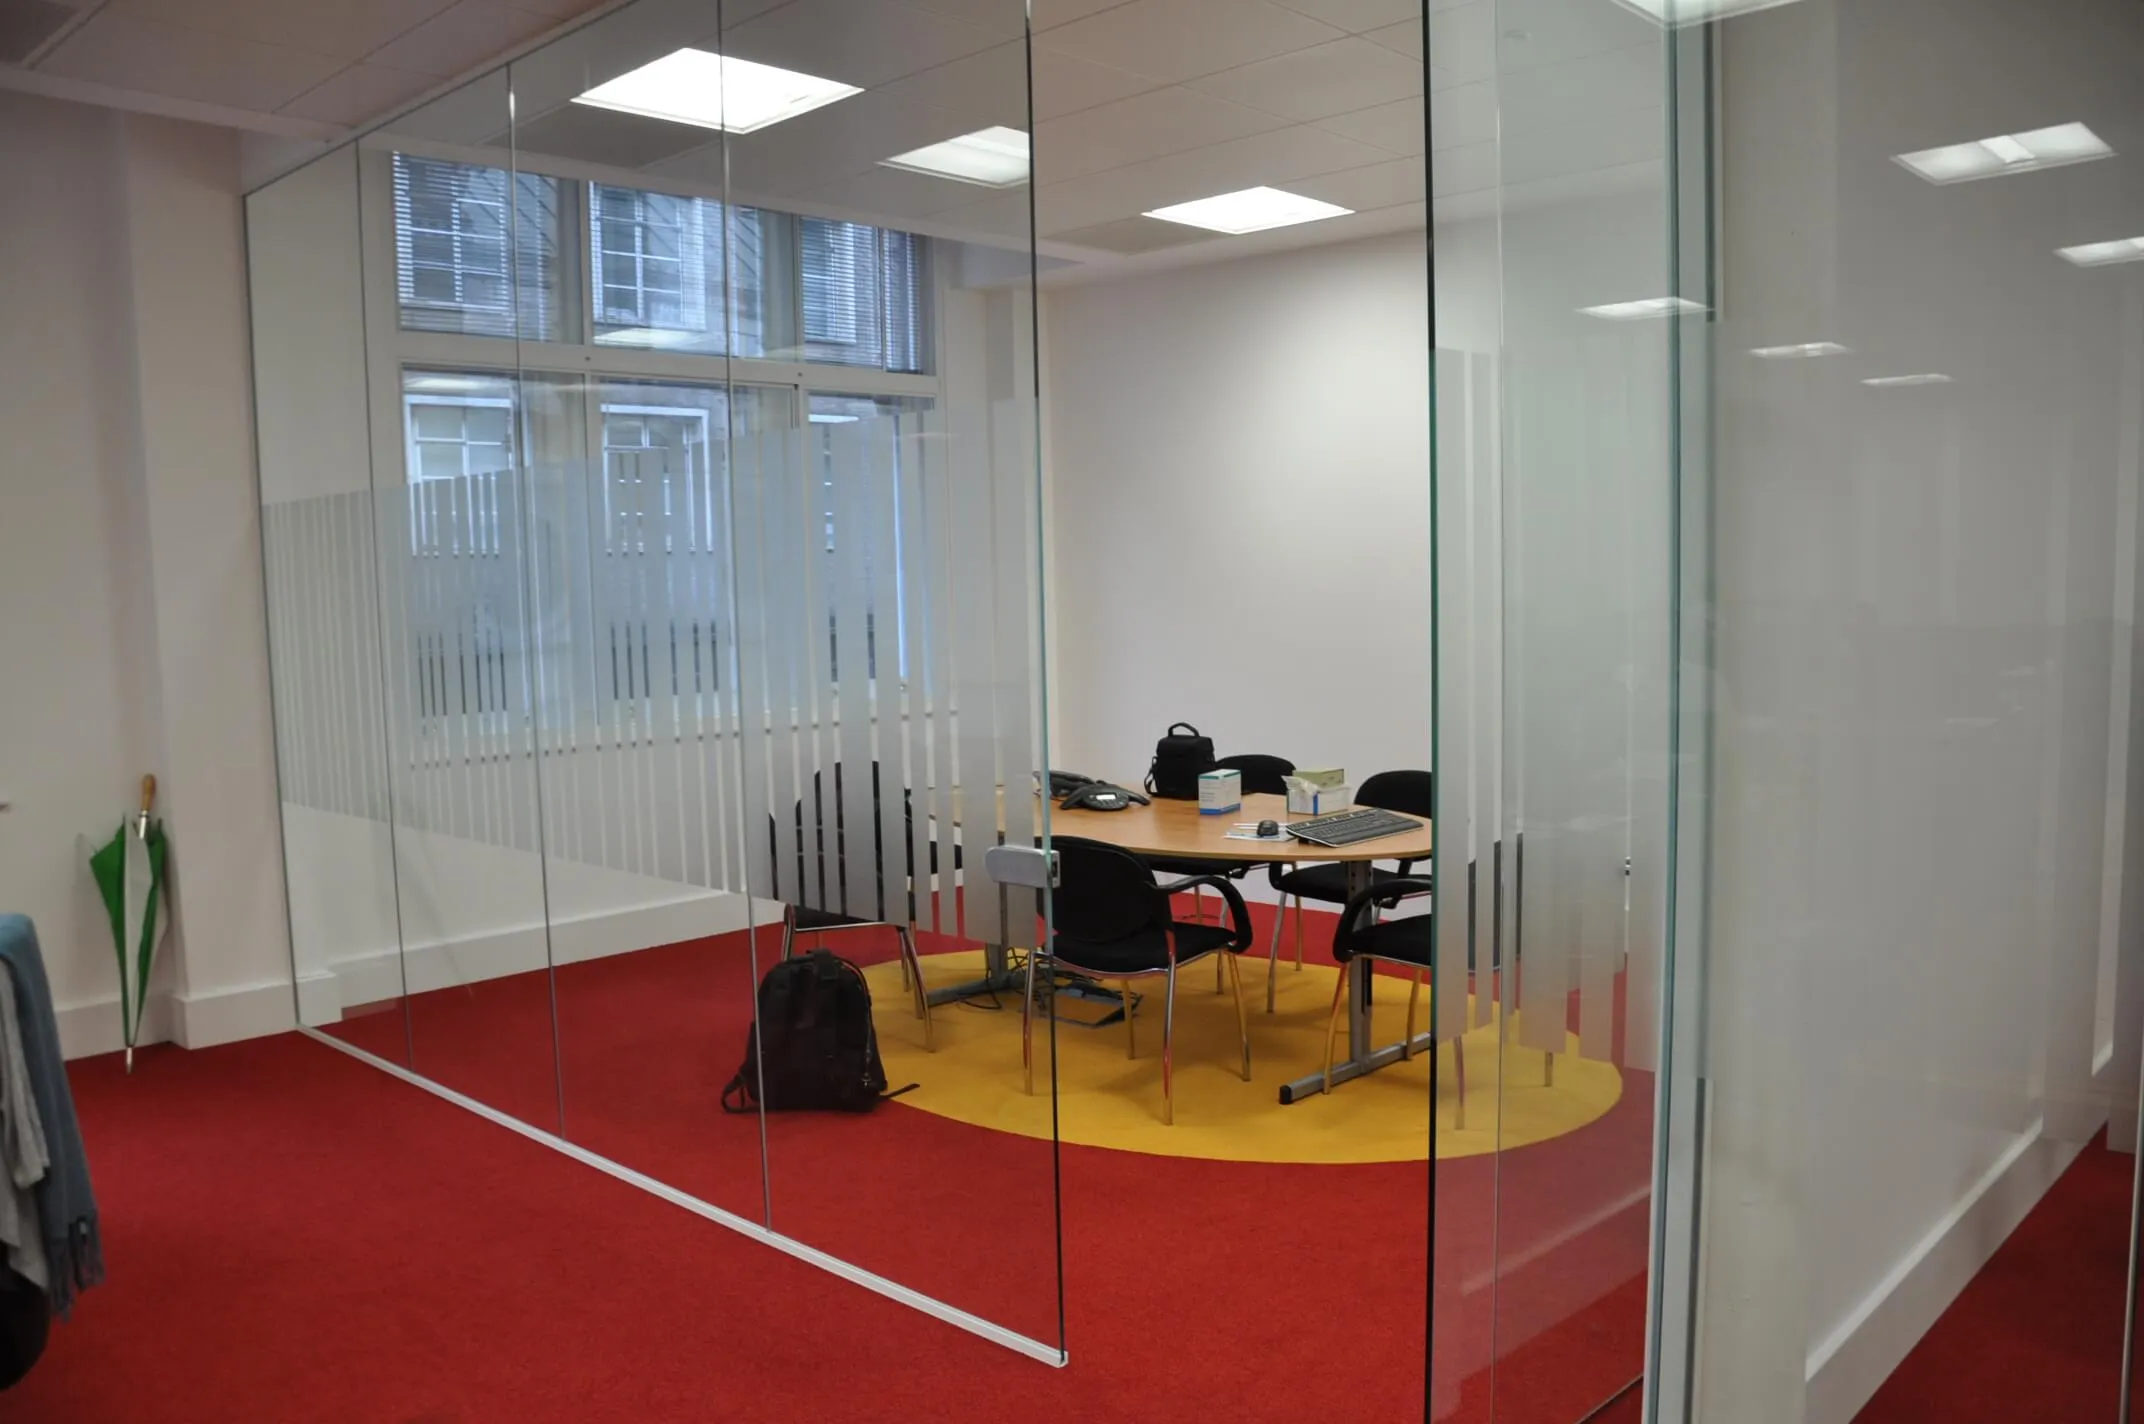 Intuition office meeting space in glass partitions with designer manifestation